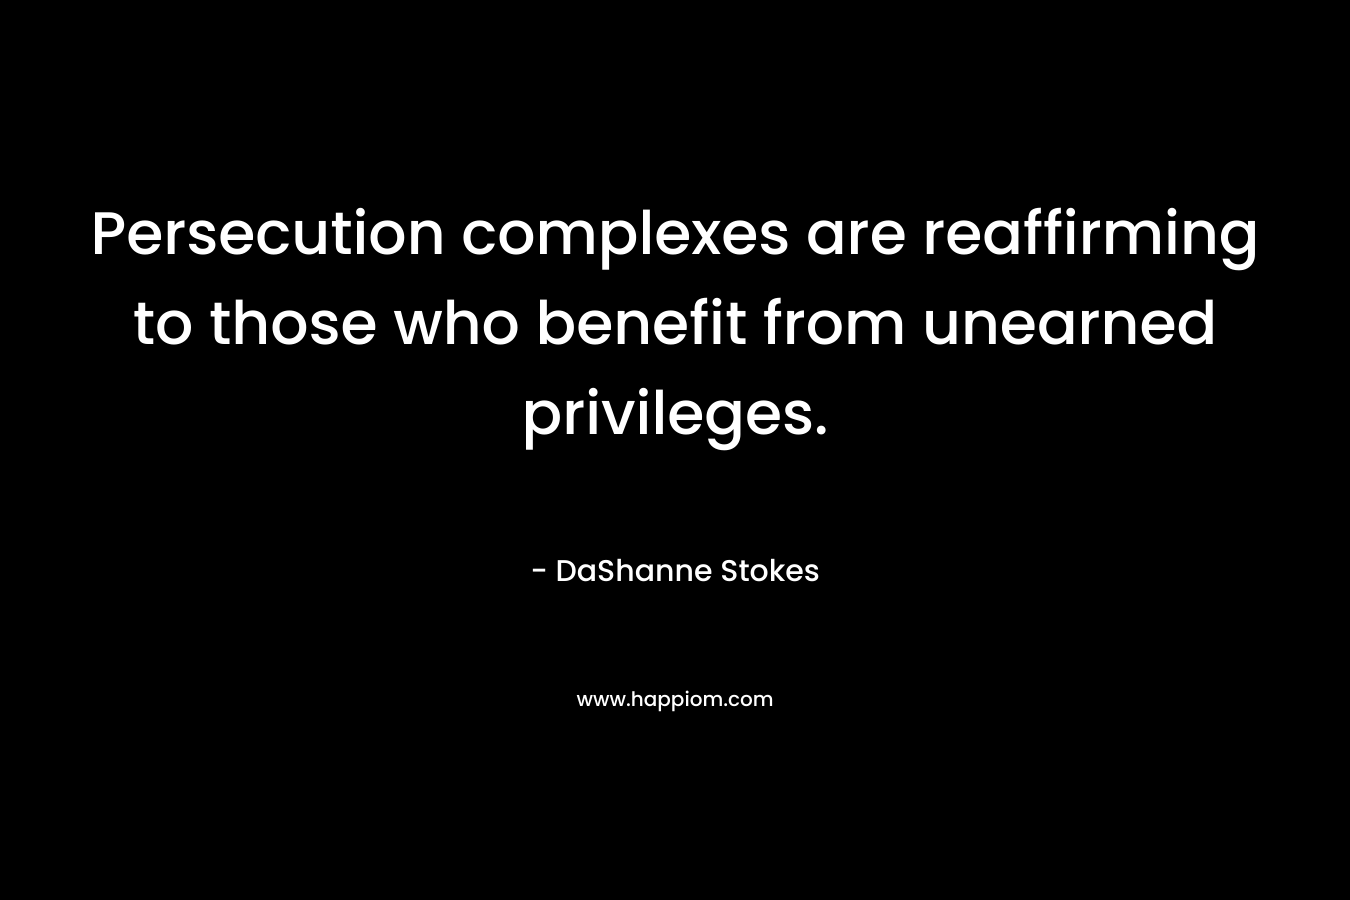 Persecution complexes are reaffirming to those who benefit from unearned privileges. – DaShanne Stokes